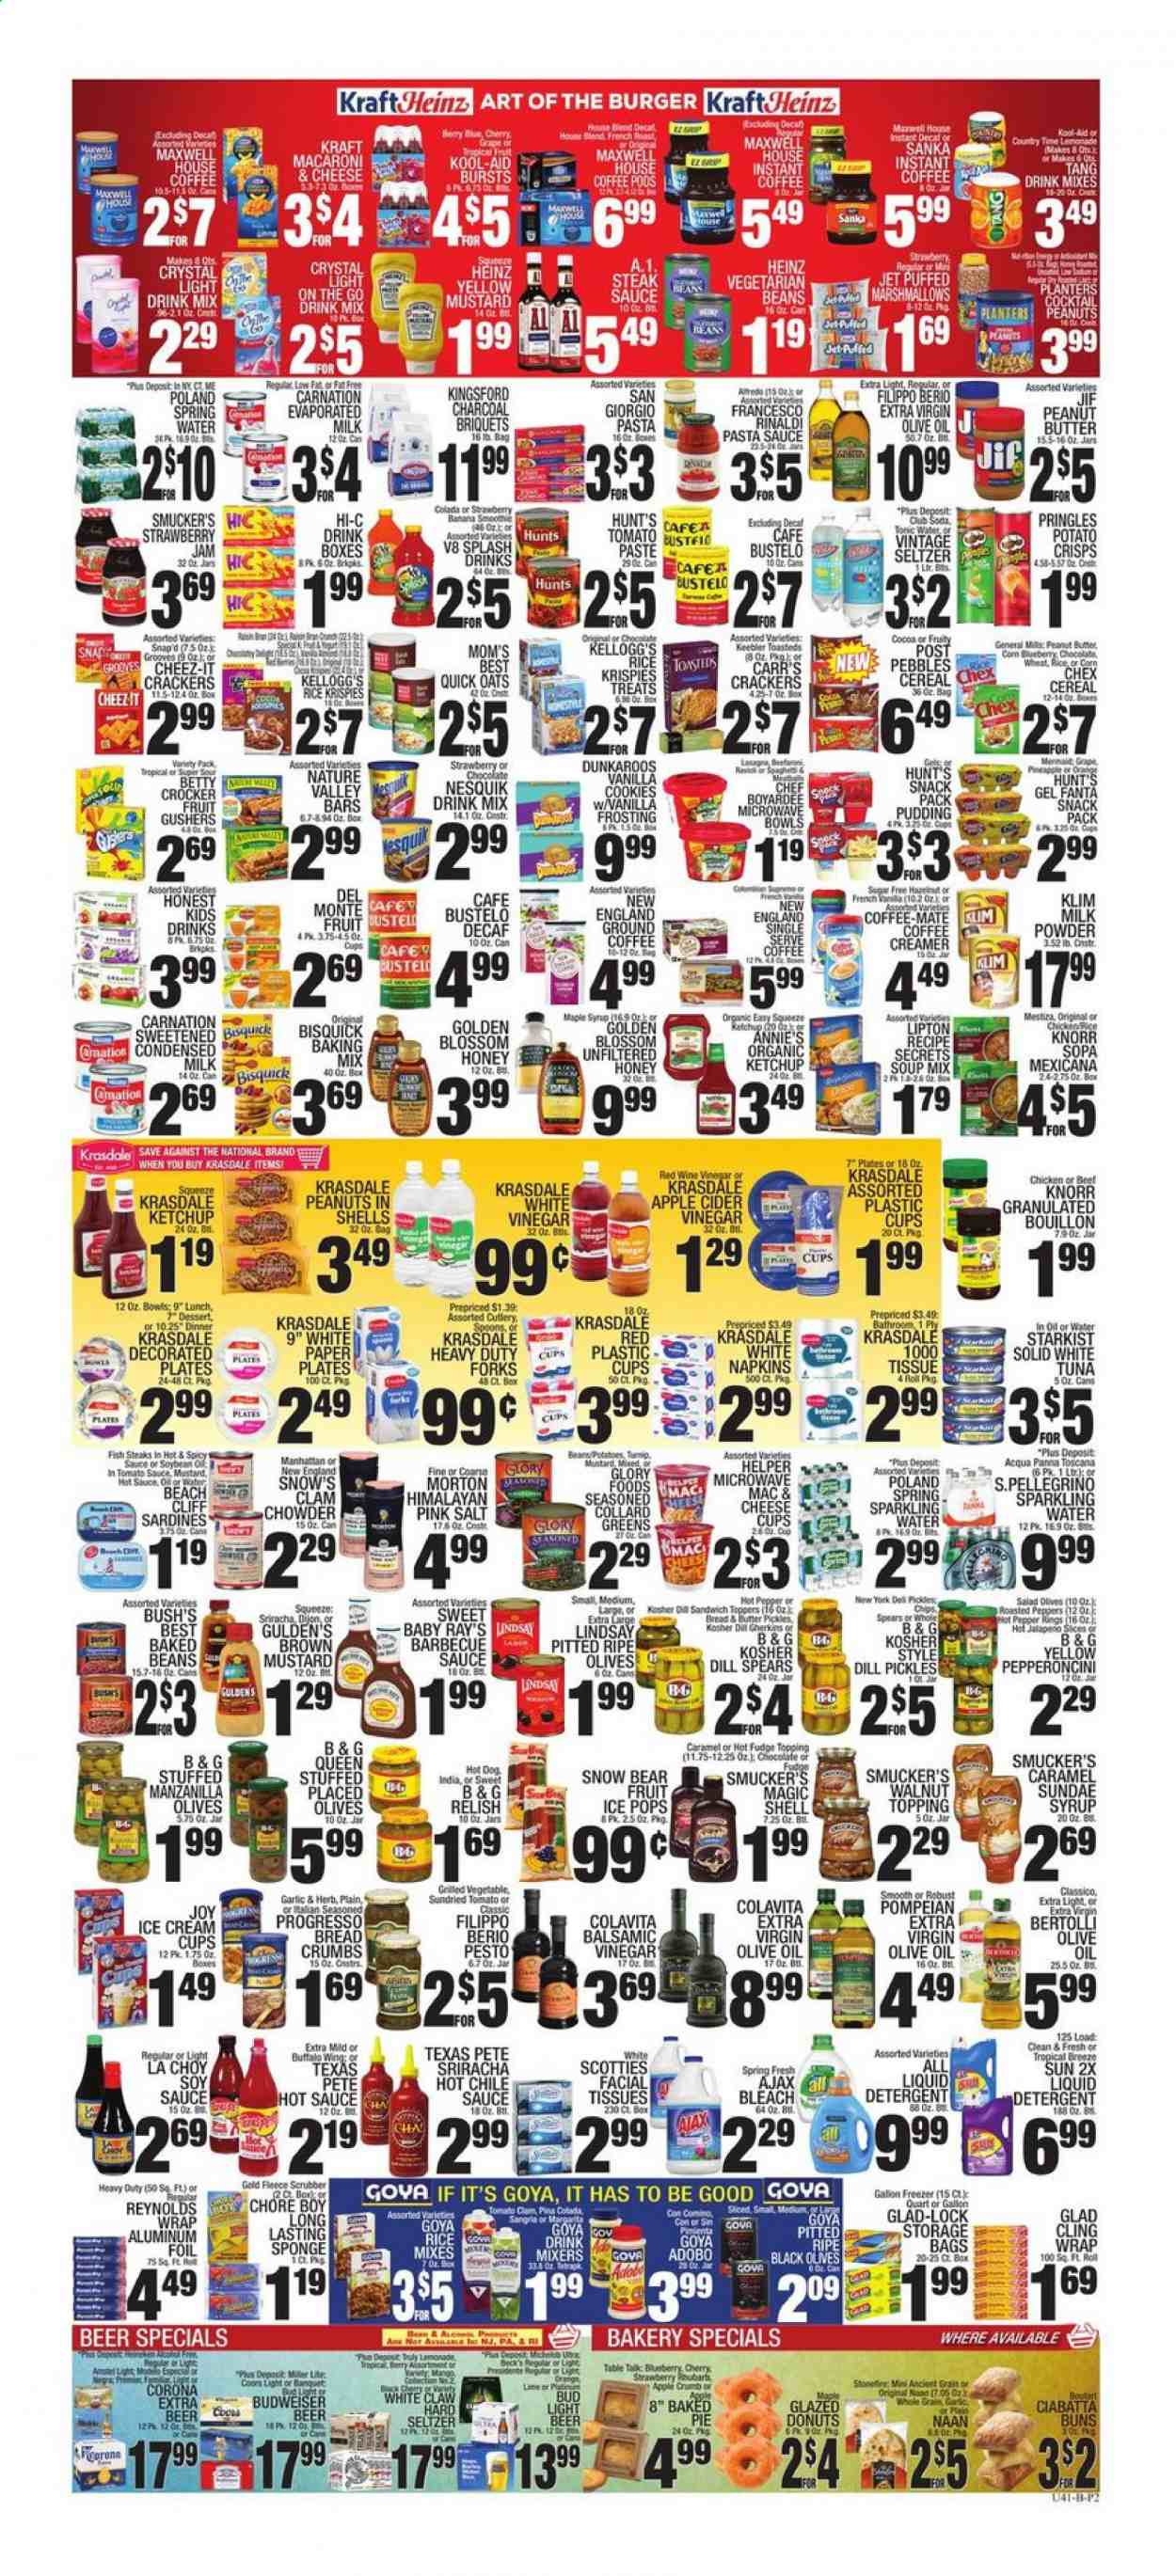 thumbnail - C-Town Flyer - 06/25/2021 - 07/01/2021 - Sales products - Budweiser, Coors, ciabatta, buns, donut, collard greens, rhubarb, jalapeño, mango, sardines, tuna, fish, fish steak, StarKist, hot dog, pasta sauce, sandwich, soup mix, soup, hamburger, Knorr, Progresso, lasagna meal, Annie's, Kraft®, Bertolli, cheese cup, pudding, Nesquik, Coffee-Mate, evaporated milk, condensed milk, milk powder, Blossom, creamer, ice cream, marshmallows, crackers, Kellogg's, Keebler, Pringles, chips, Cheez-It, Bisquick, bouillon, frosting, oats, topping, strawberry jam, Heinz, pickles, olives, baked beans, clam chowder, Goya, Chef Boyardee, cereals, Rice Krispies, Quick Oats, Mom's Best, Nature Valley, dill, adobo sauce, BBQ sauce, mustard, soy sauce, sriracha, steak sauce, hot sauce, ketchup, pesto, Classico, apple cider vinegar, balsamic vinegar, extra virgin olive oil, wine vinegar, olive oil, maple syrup, honey, fruit jam, peanut butter, syrup, Jif, peanuts, Planters, lemonade, Fanta, Lipton, Hi-c, tonic, Country Time, Club Soda, seltzer water, sparkling water, San Pellegrino, Maxwell House, coffee pods, instant coffee, ground coffee, White Claw, TRULY, beer, Bud Light, Corona Extra, Beck's, steak. Page 2.